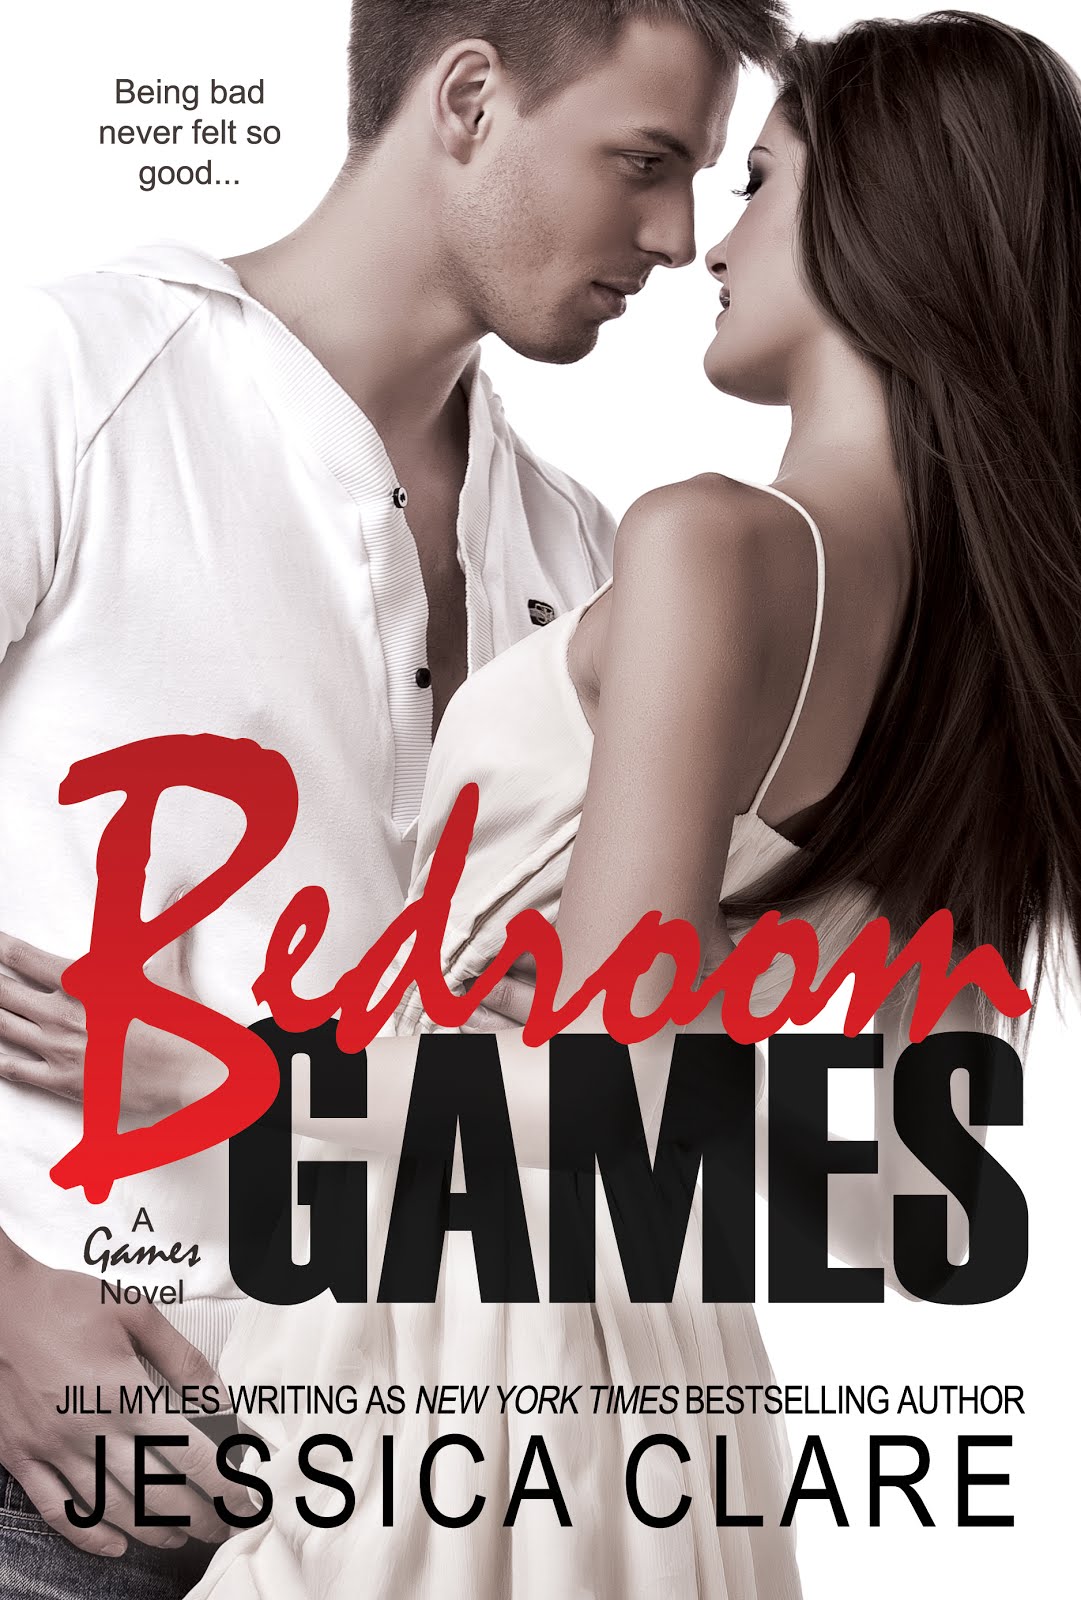 bedroom games by jessica clare.jpg